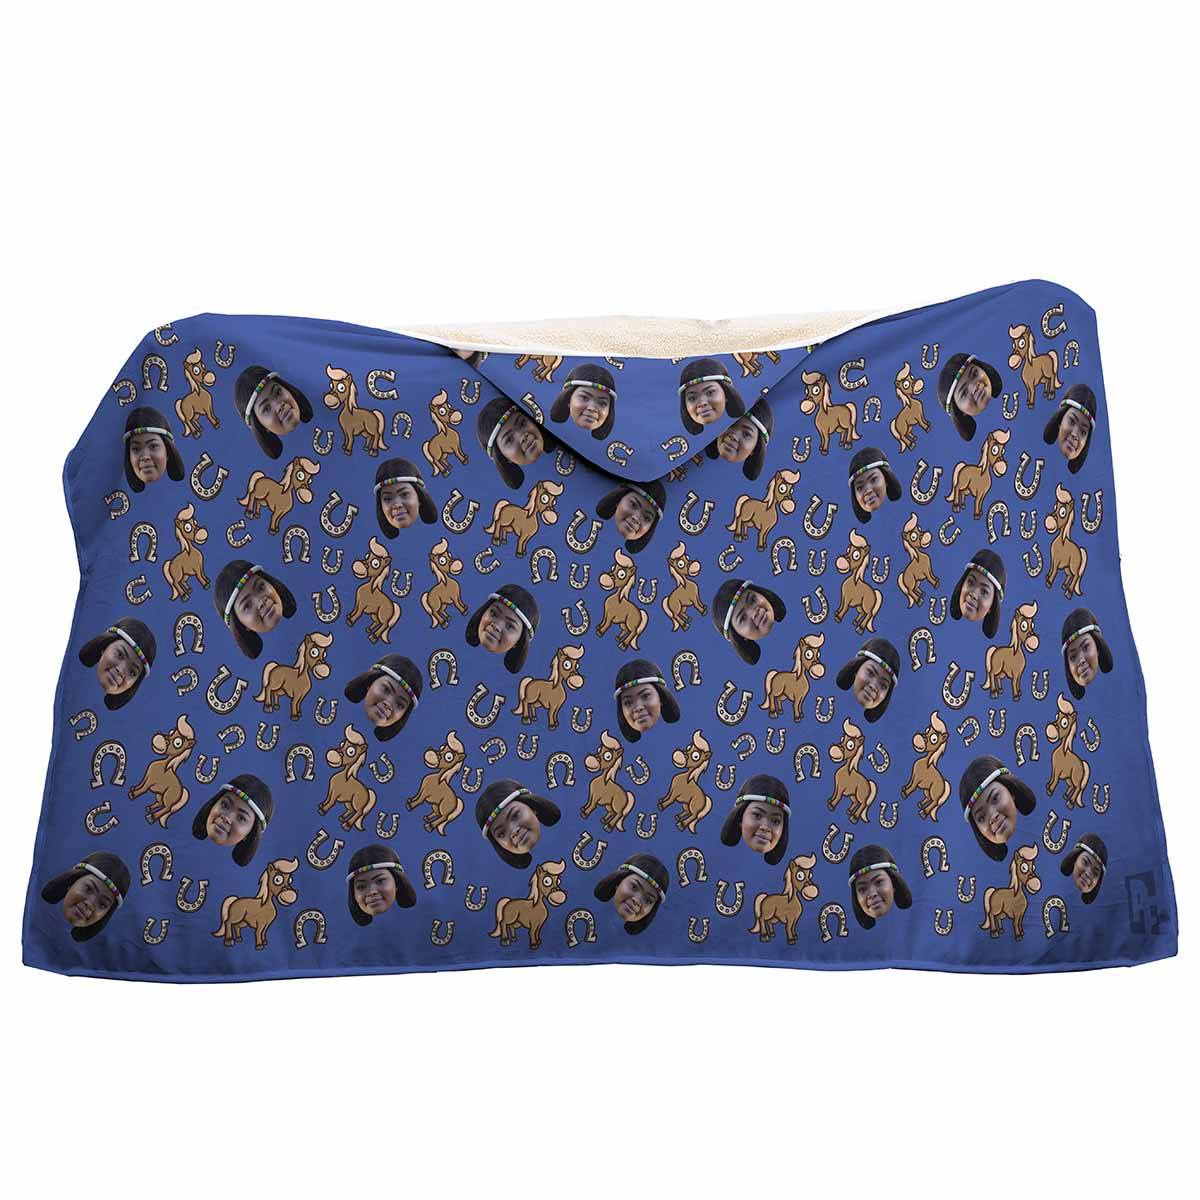 darkblue Horse hooded blanket personalized with photo of face printed on it